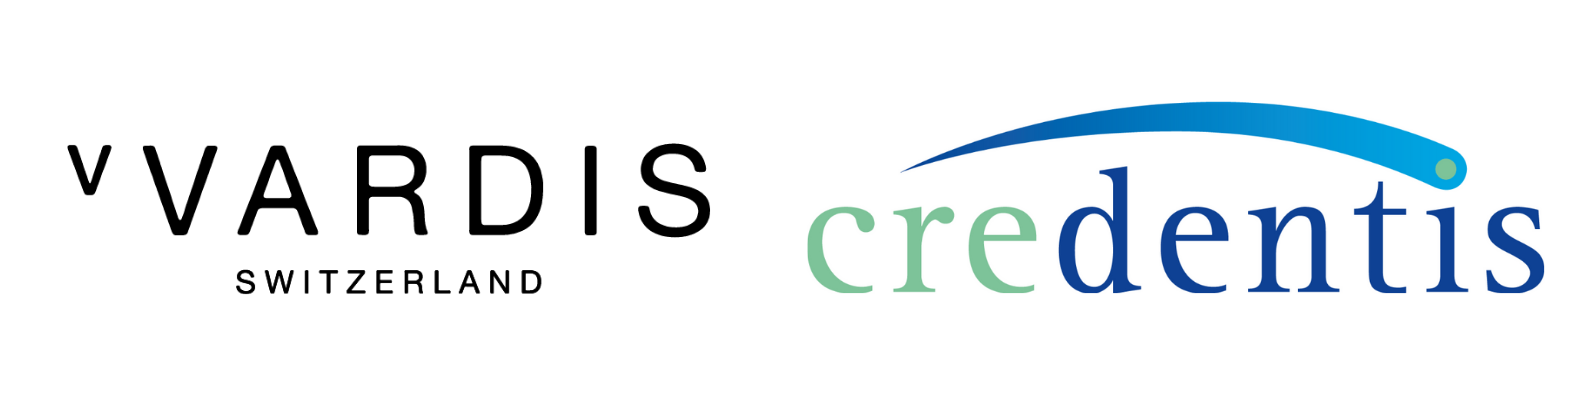 credentis acquired by vVardis – becoming R&D powerhouse in oral care and dental